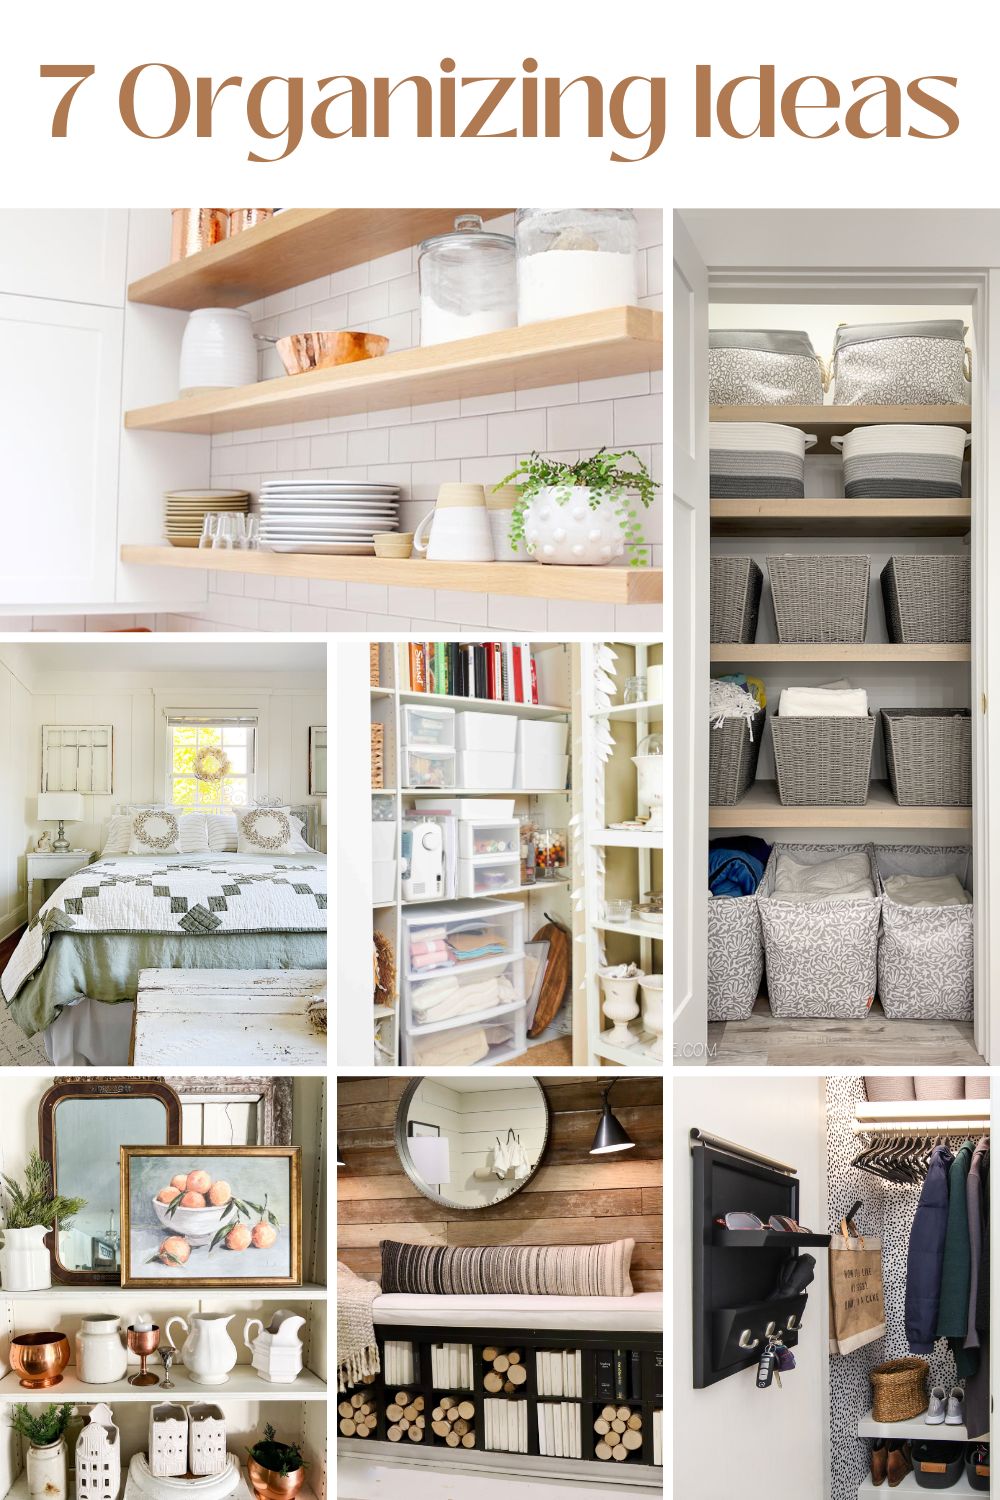 Here are seven different ideas to organize your home.